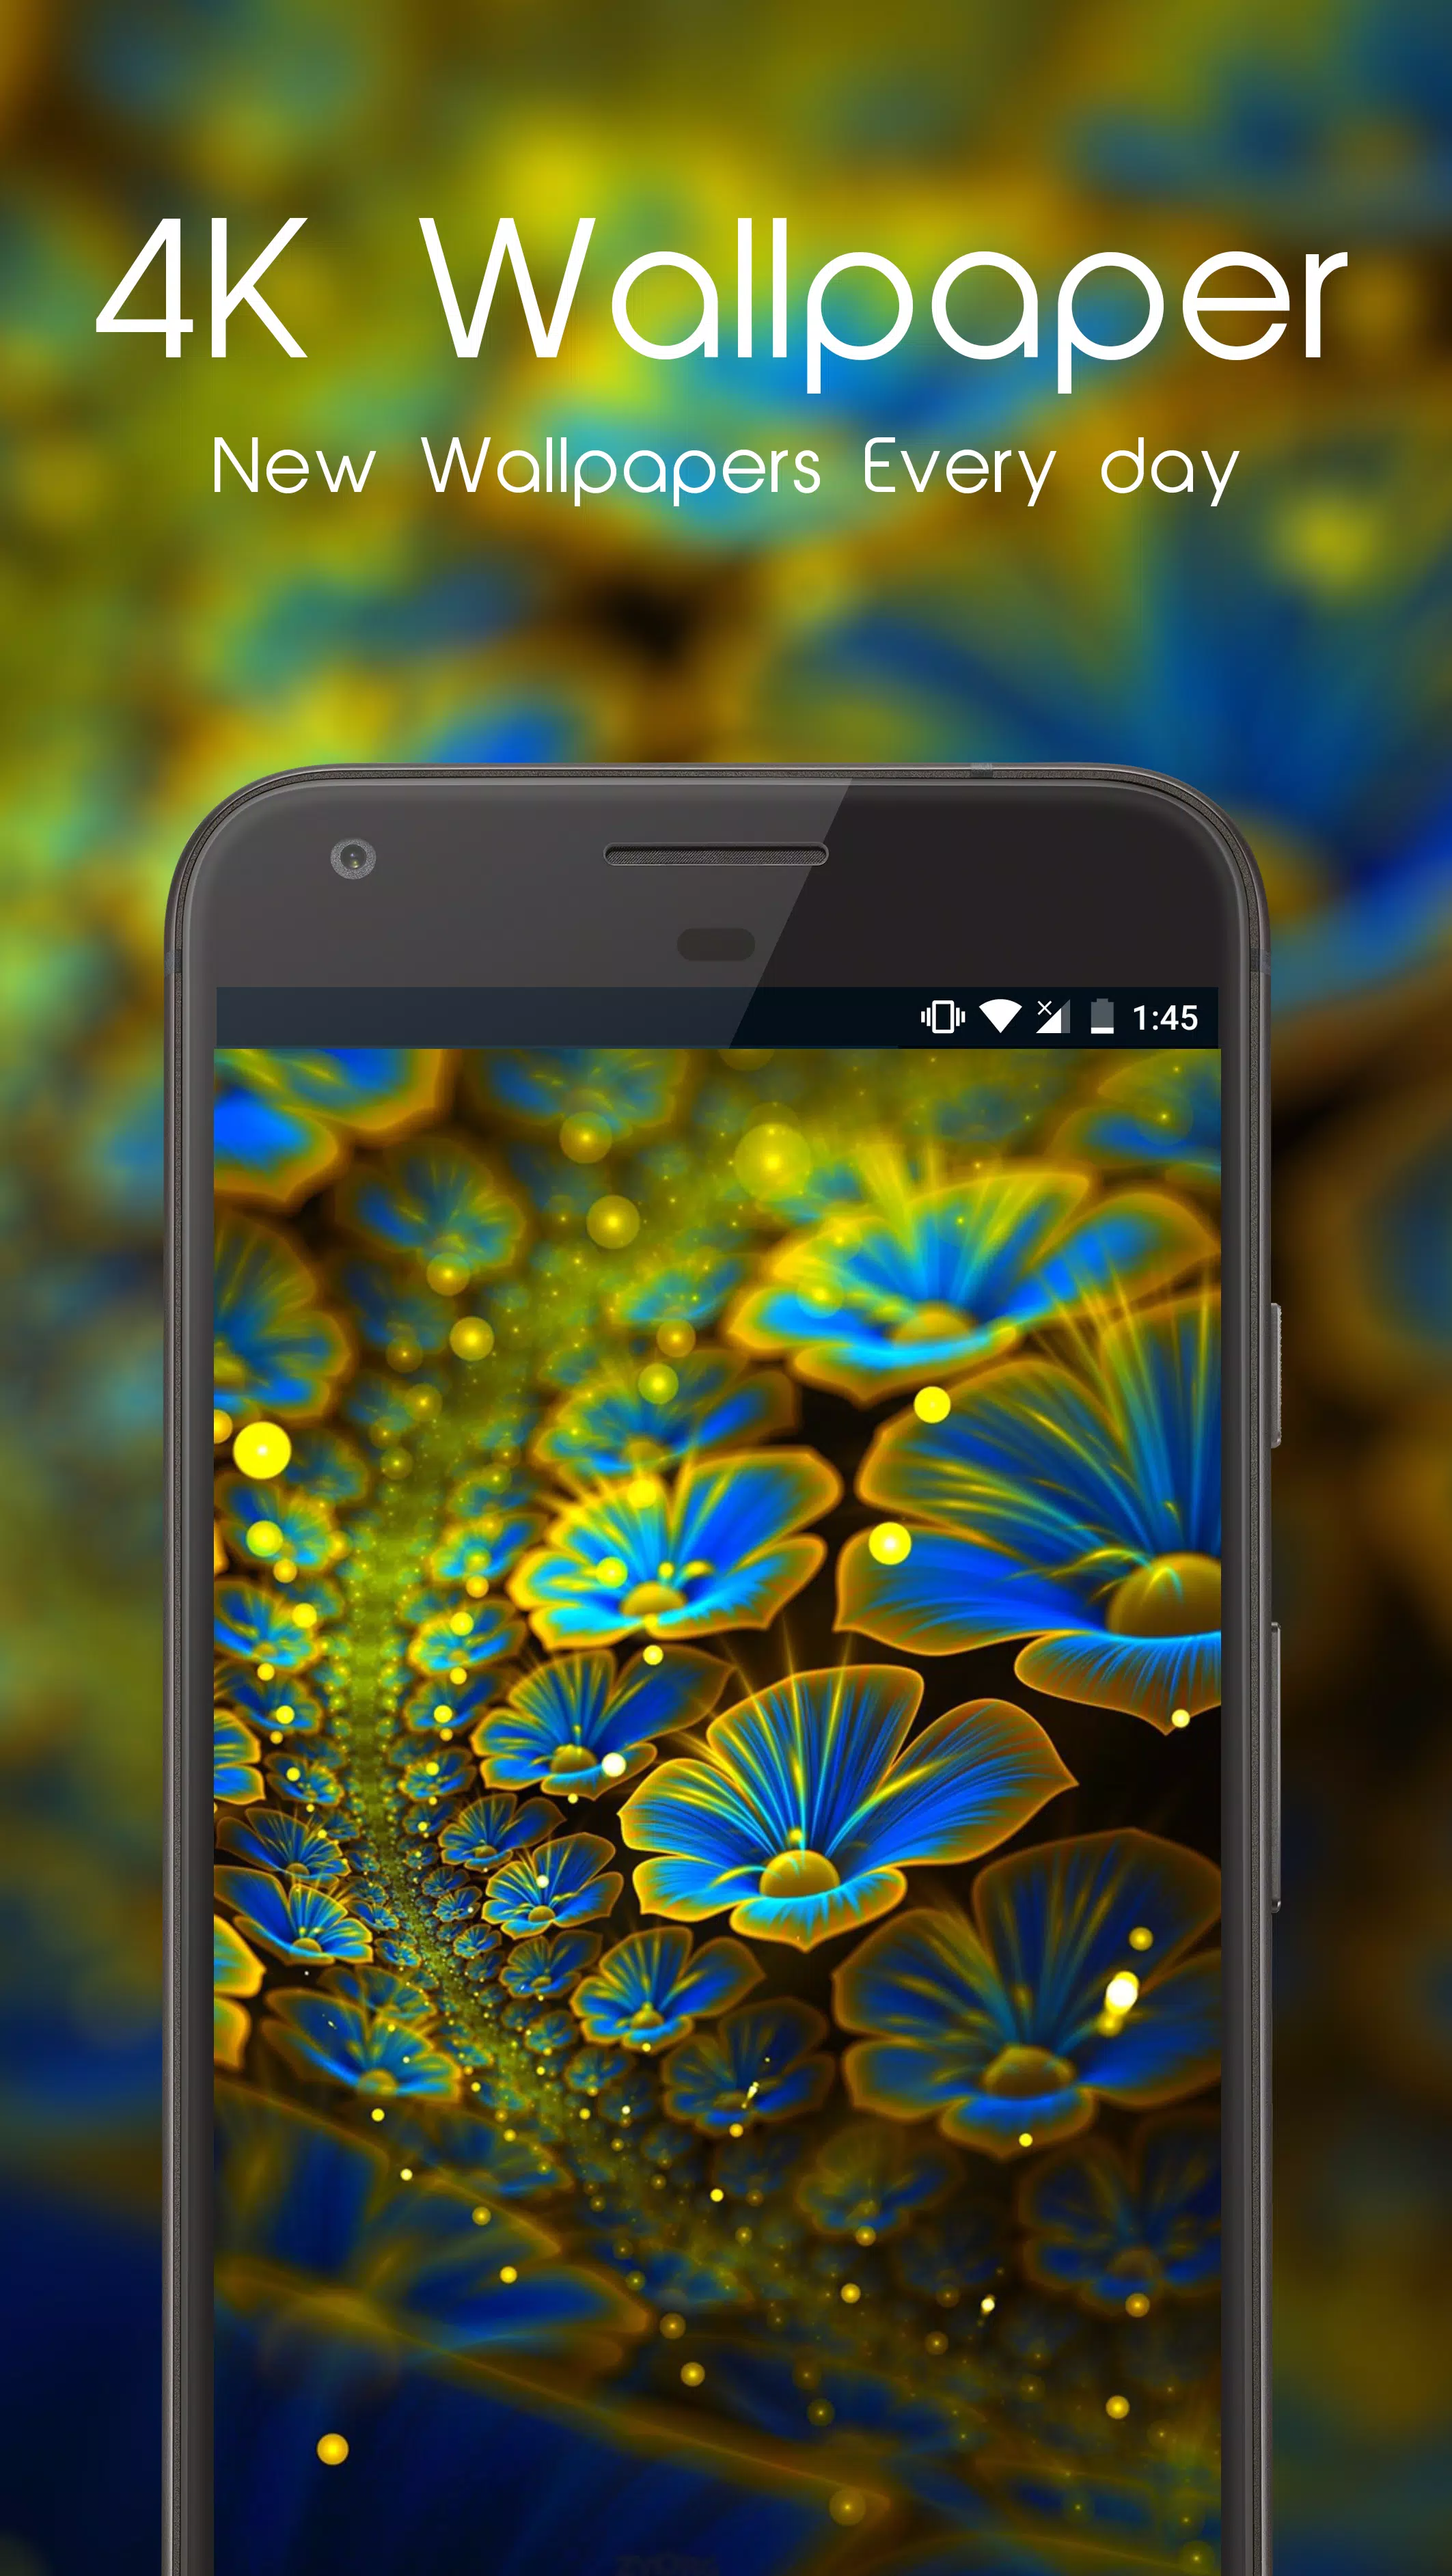 K full hd wallpapers apk for android download